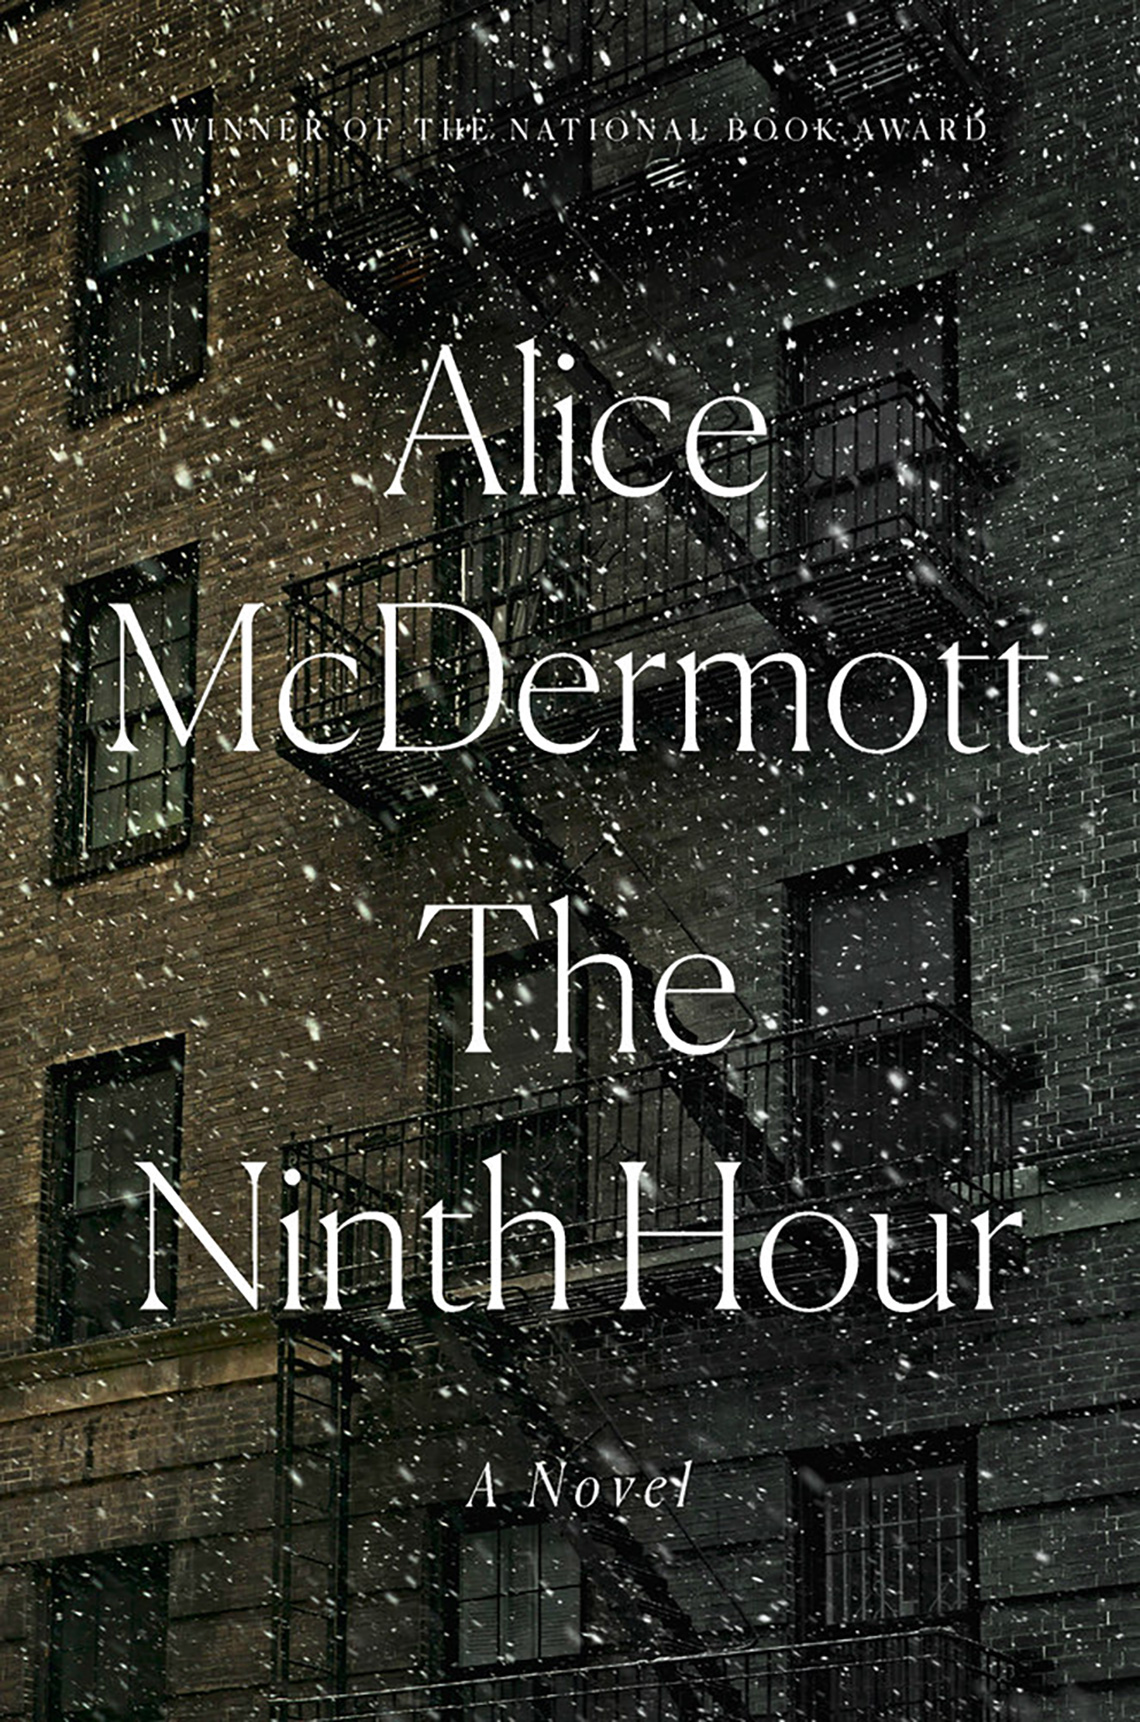 'The Ninth Hour' by Alice McDermott